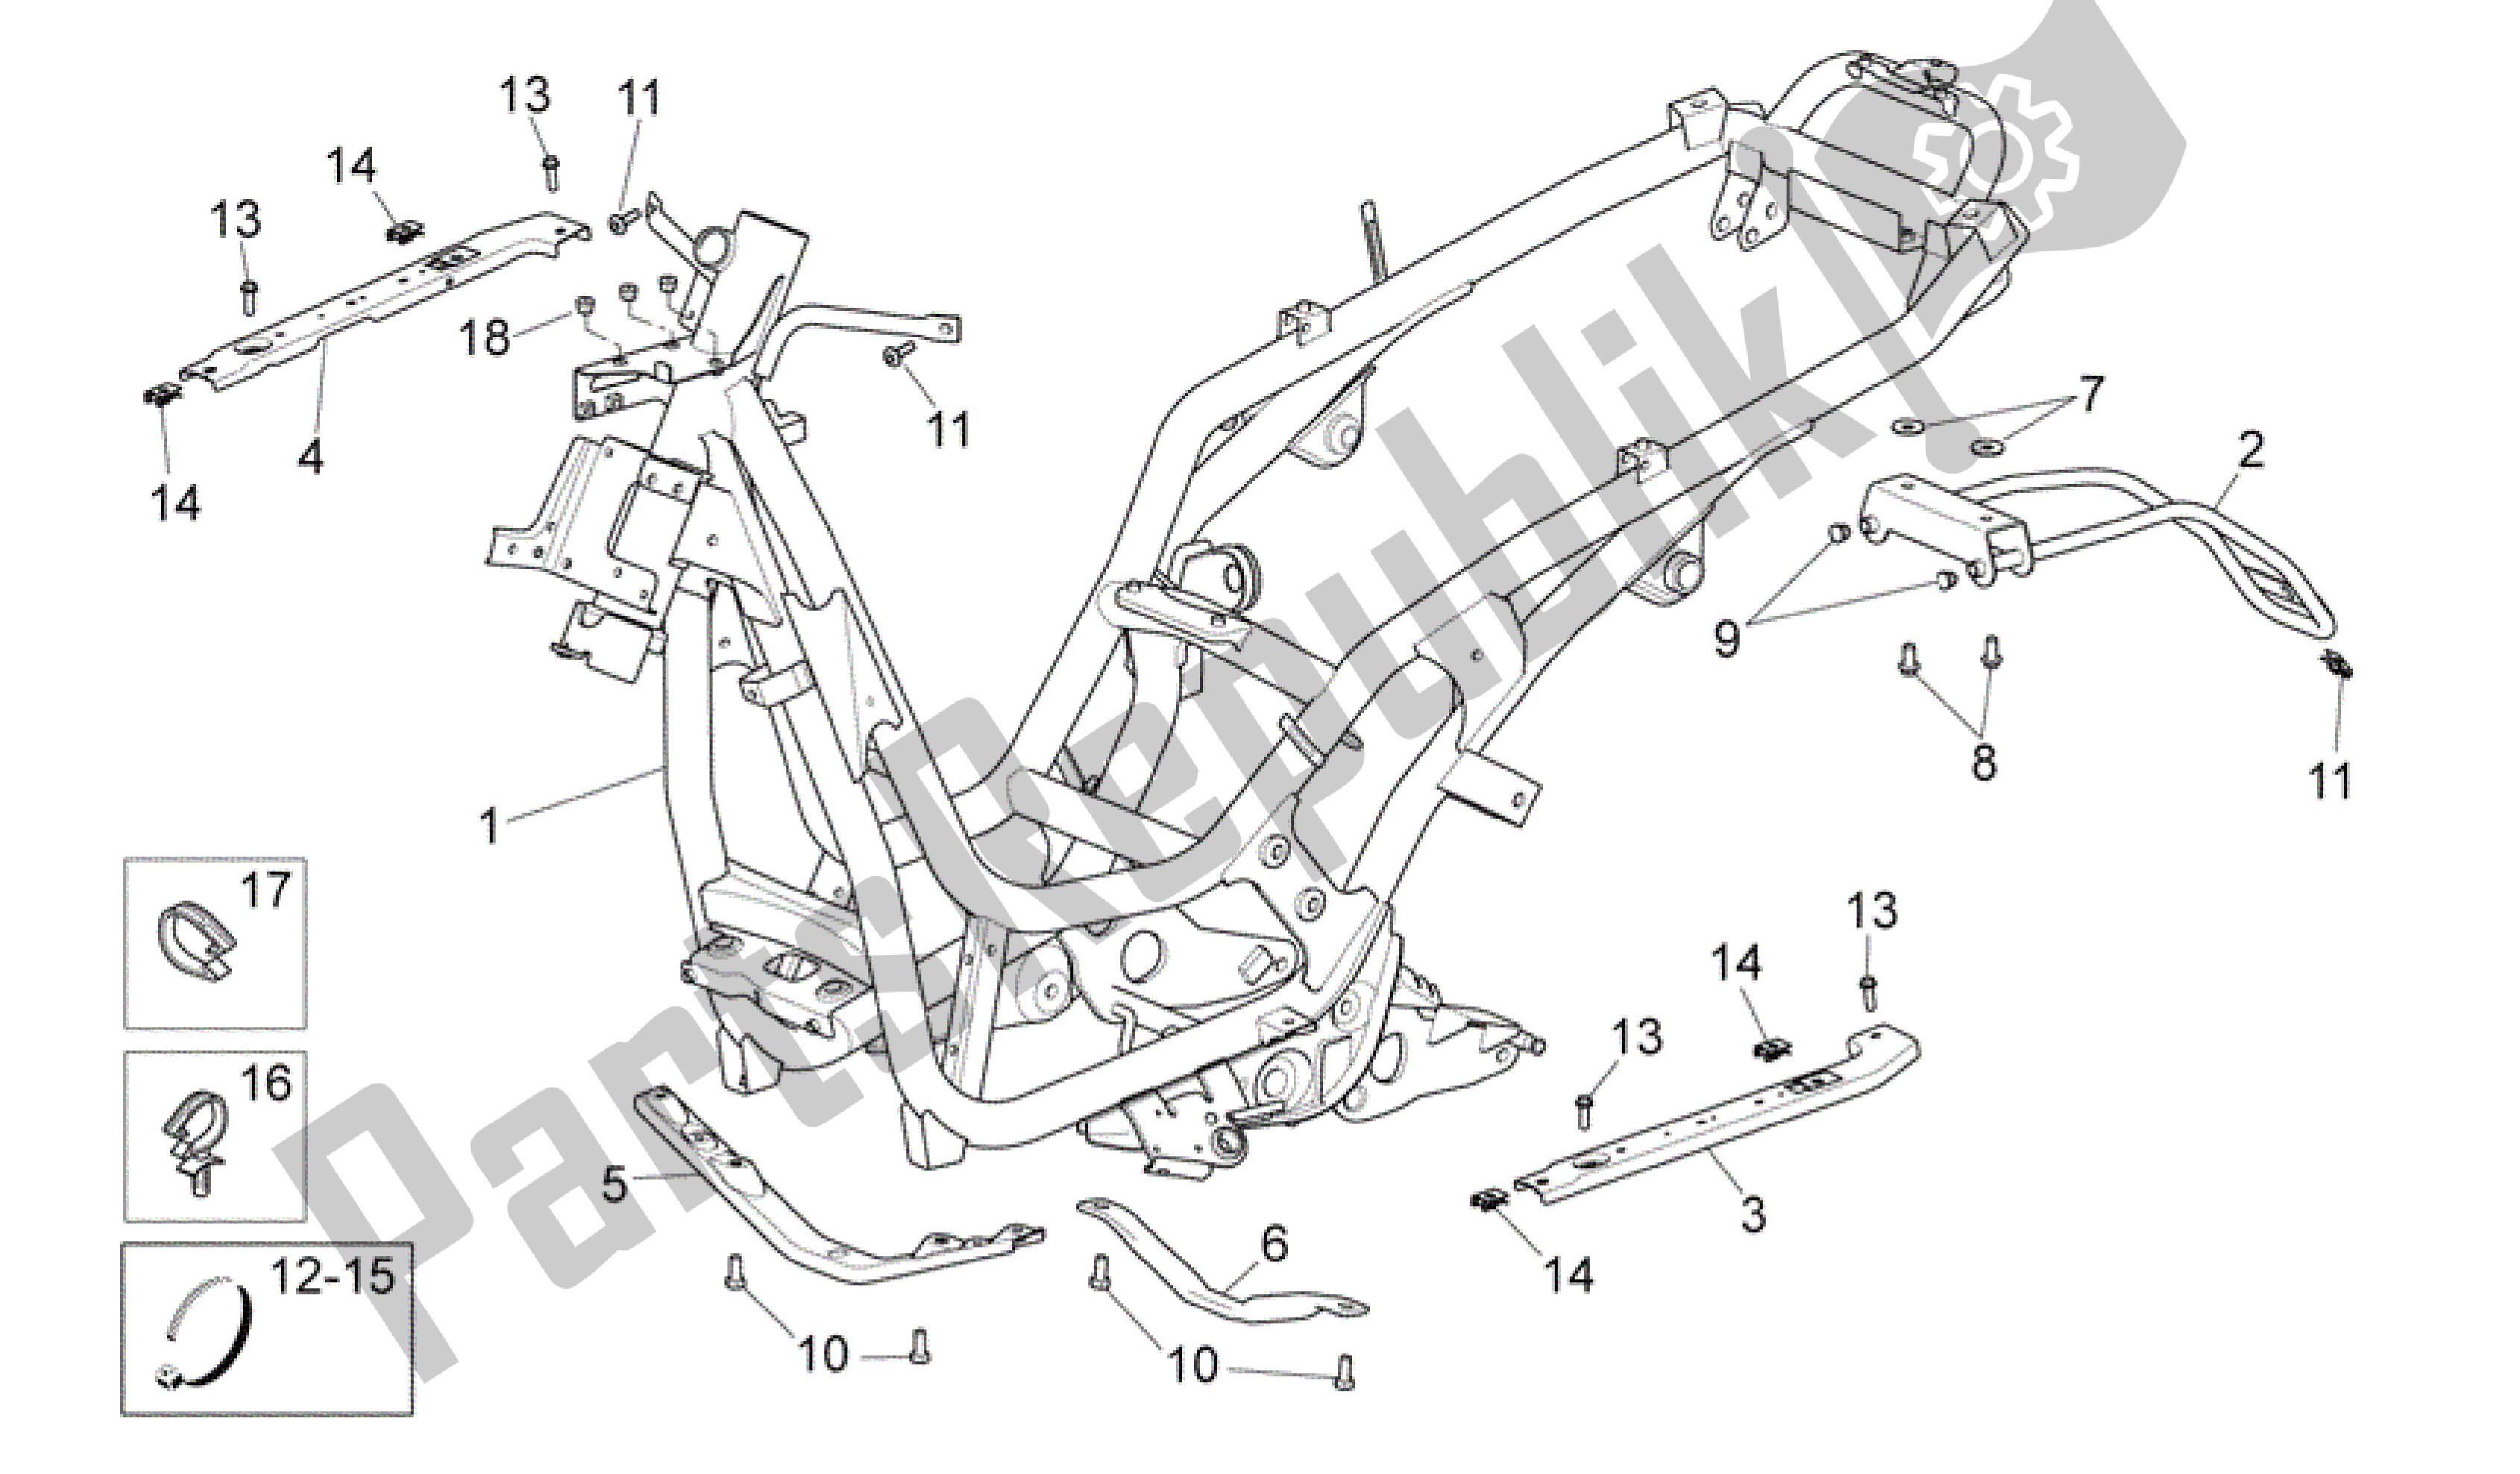 All parts for the Frame of the Aprilia Scarabeo 500 2006 - 2008